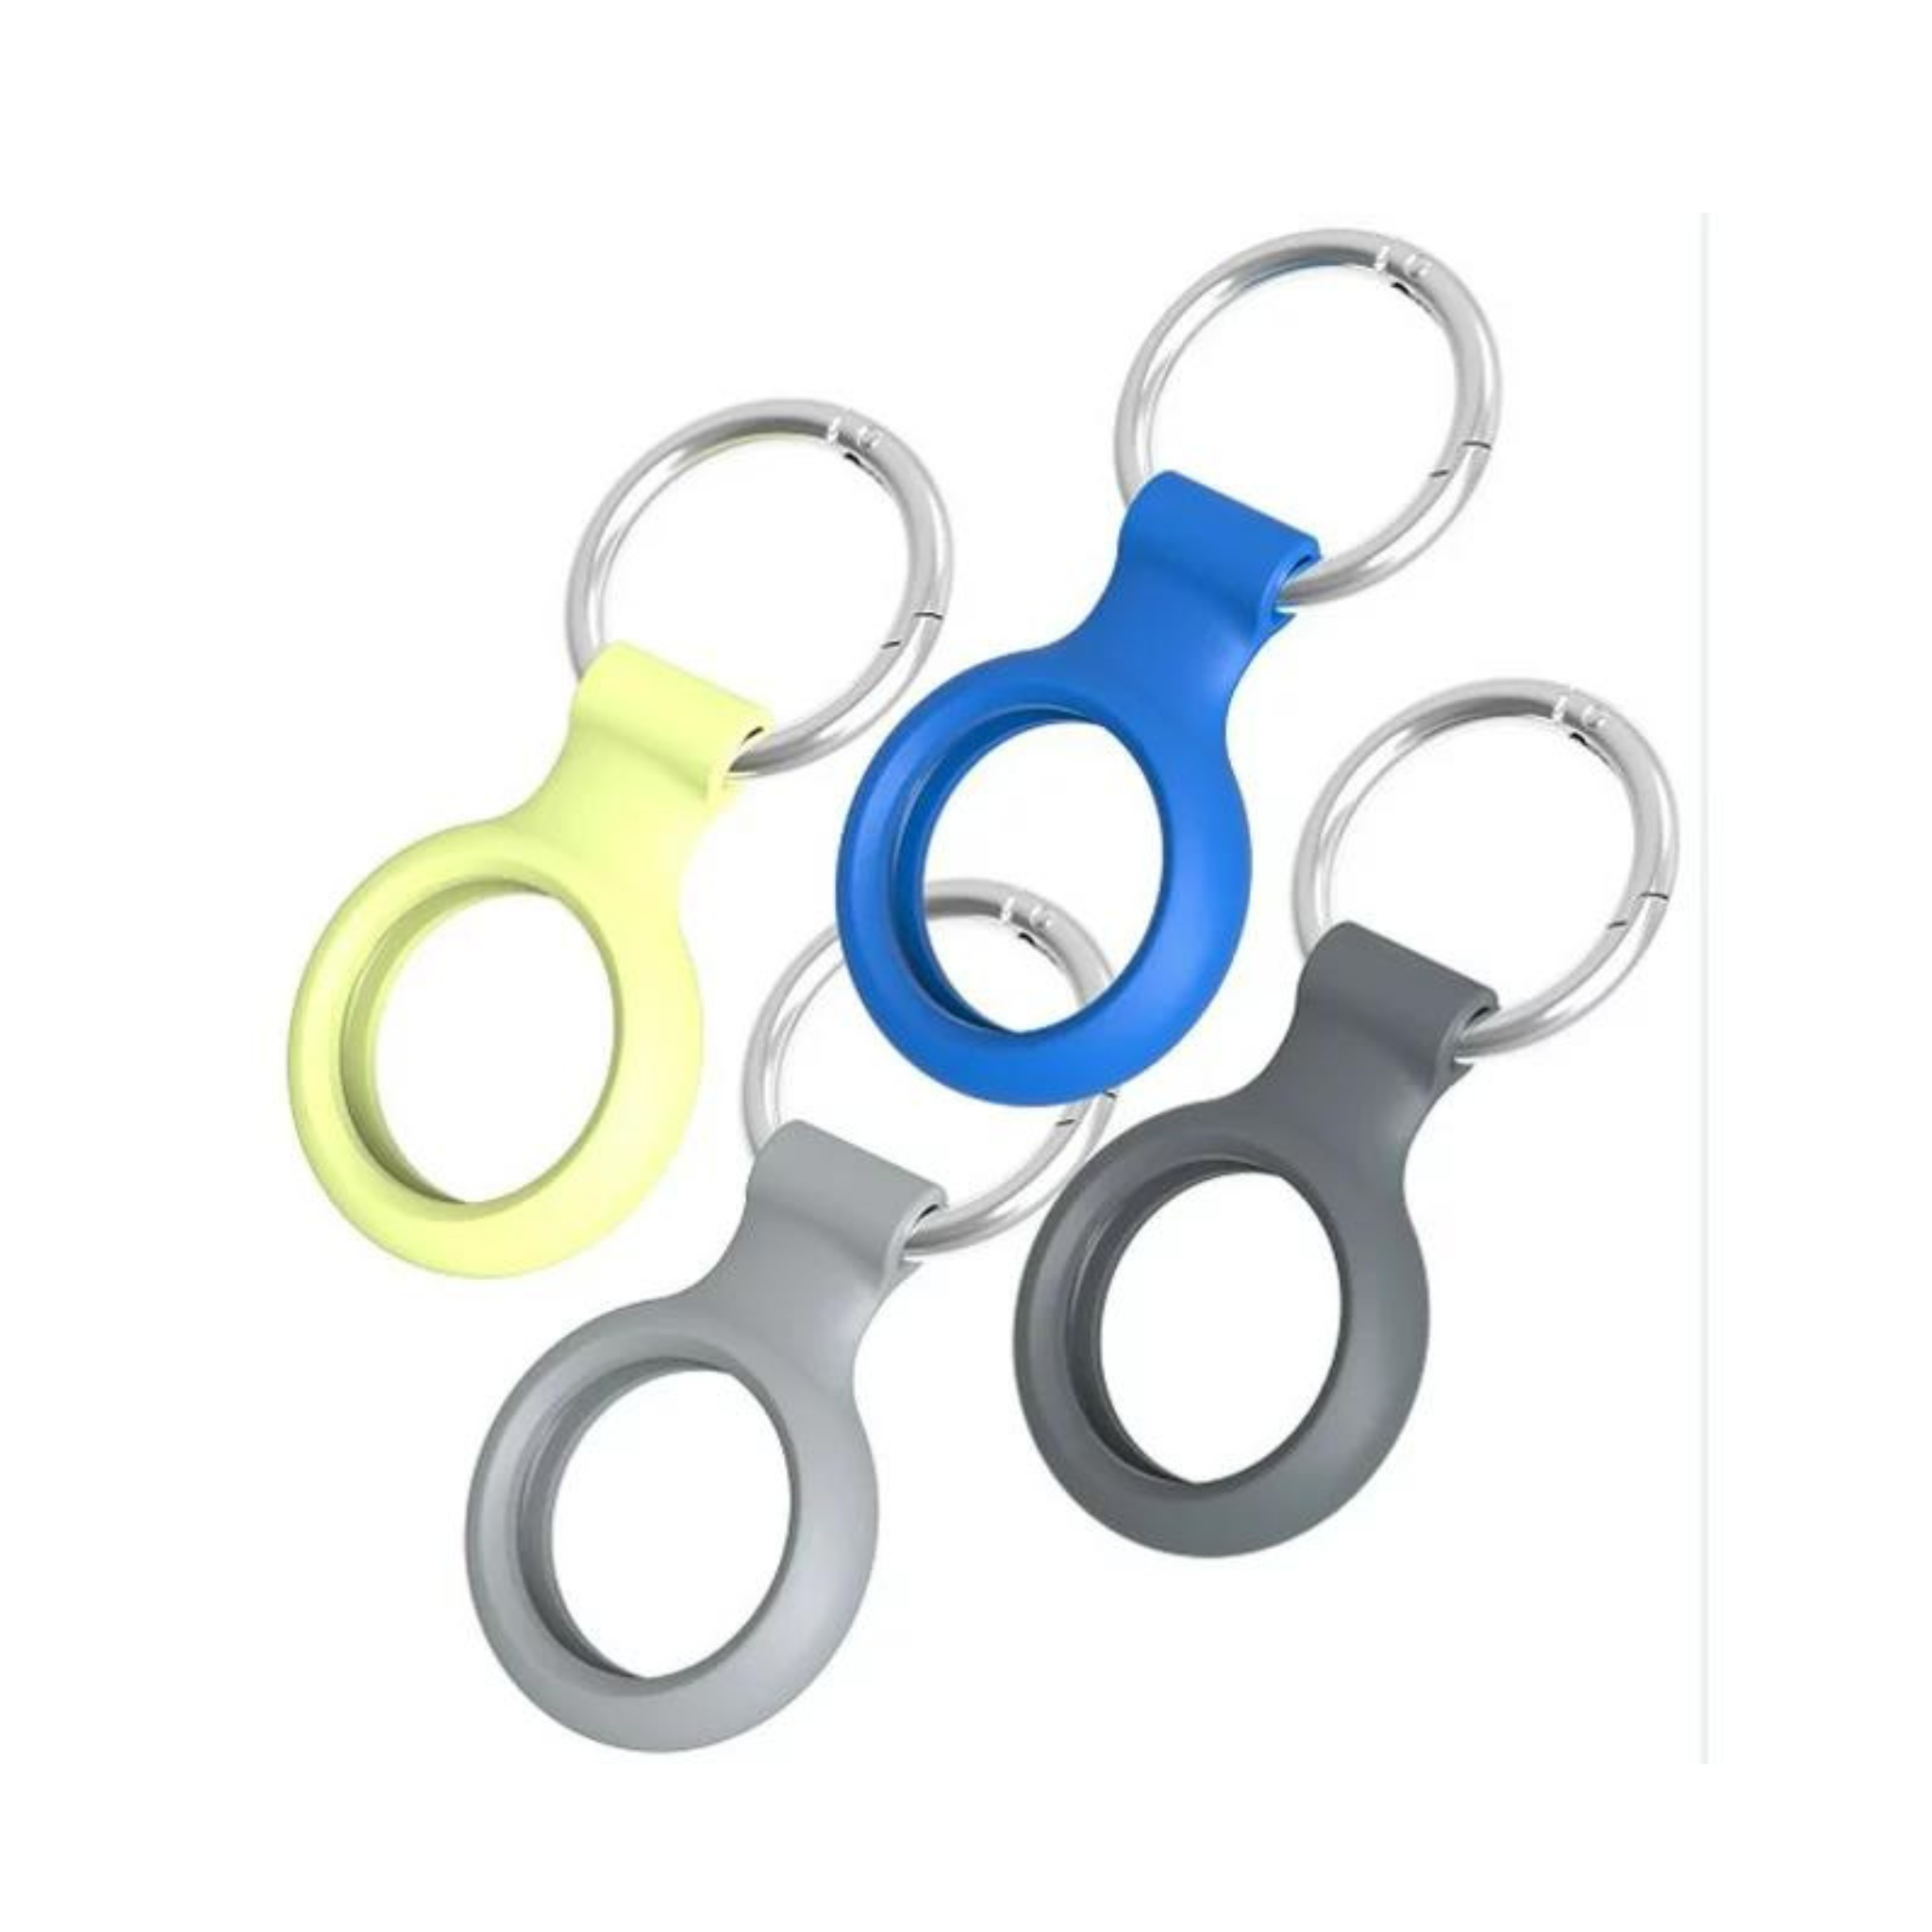 4-Count onn. AirTag Holders w/ Carabiner-Style Ring